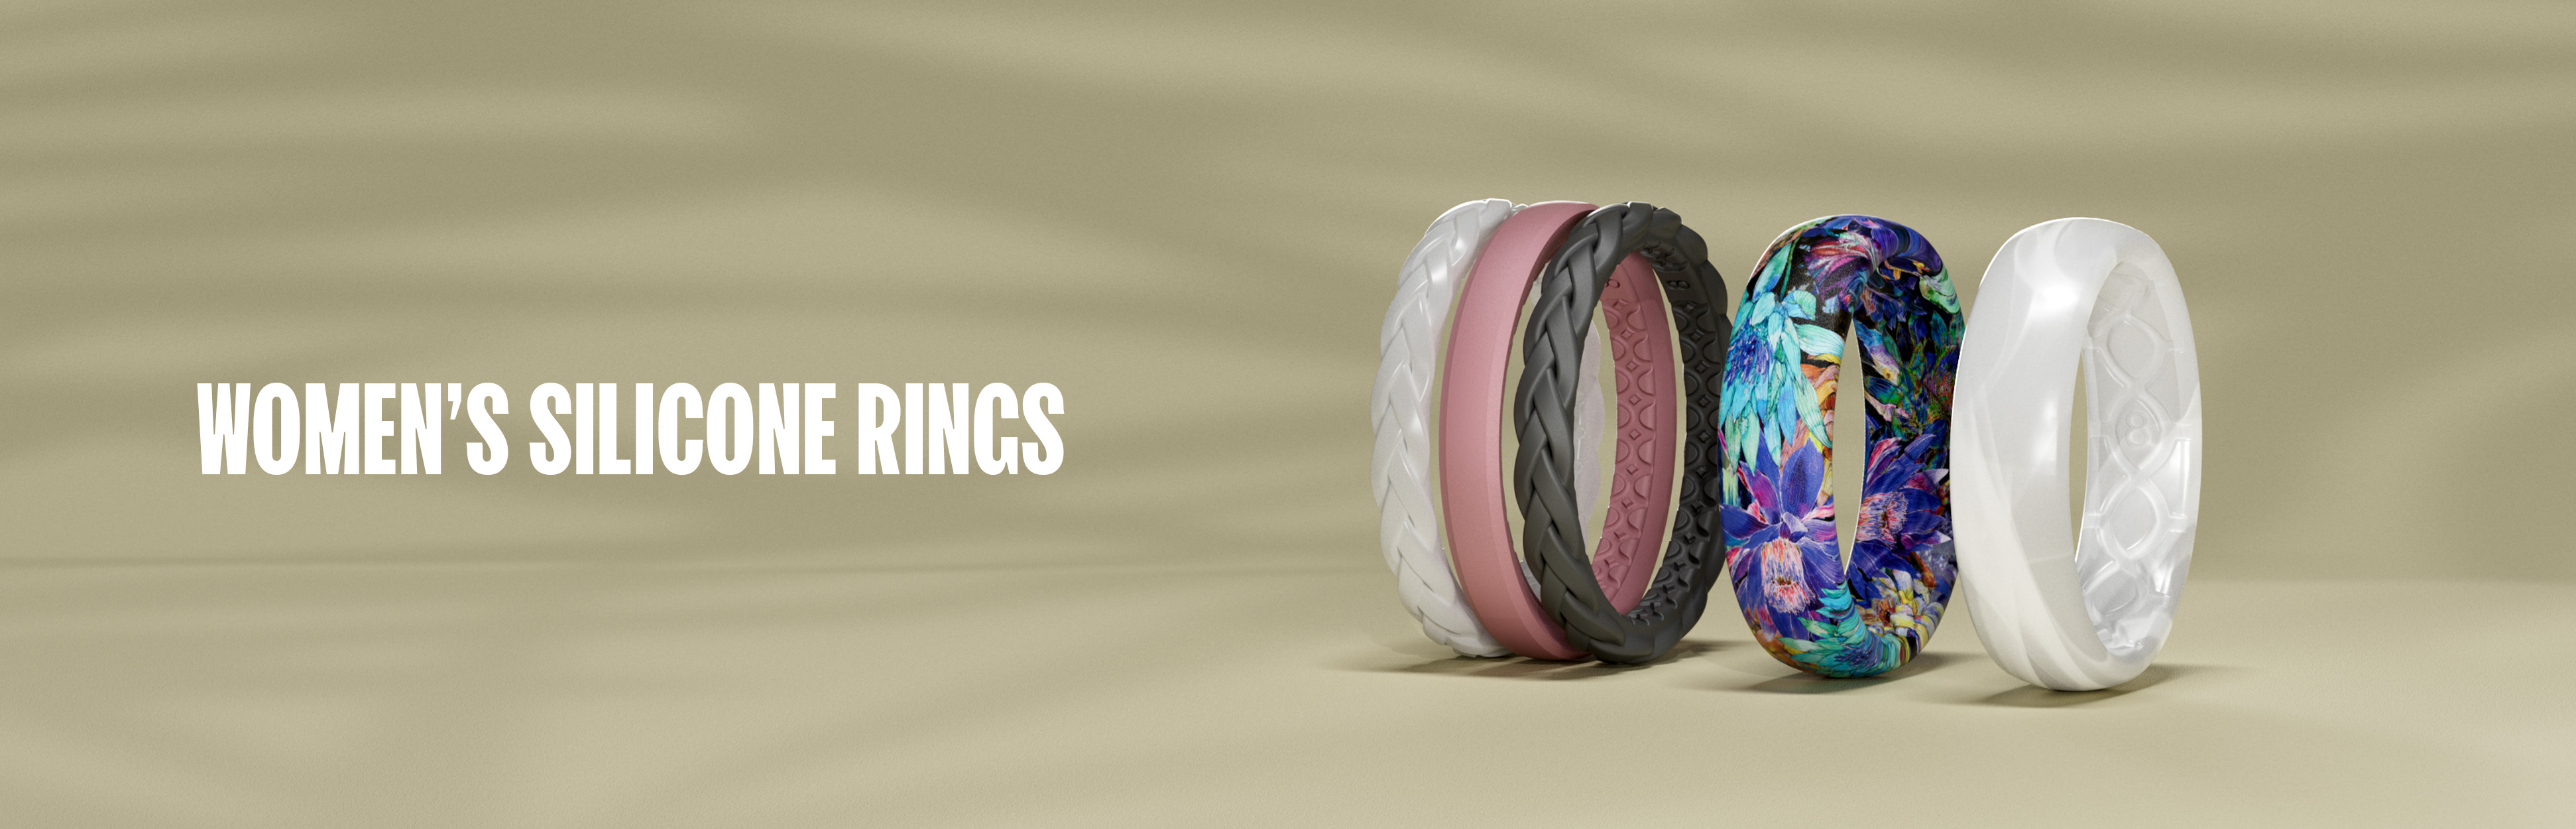 Silicone Rings for Women - Breathable Wedding Bands